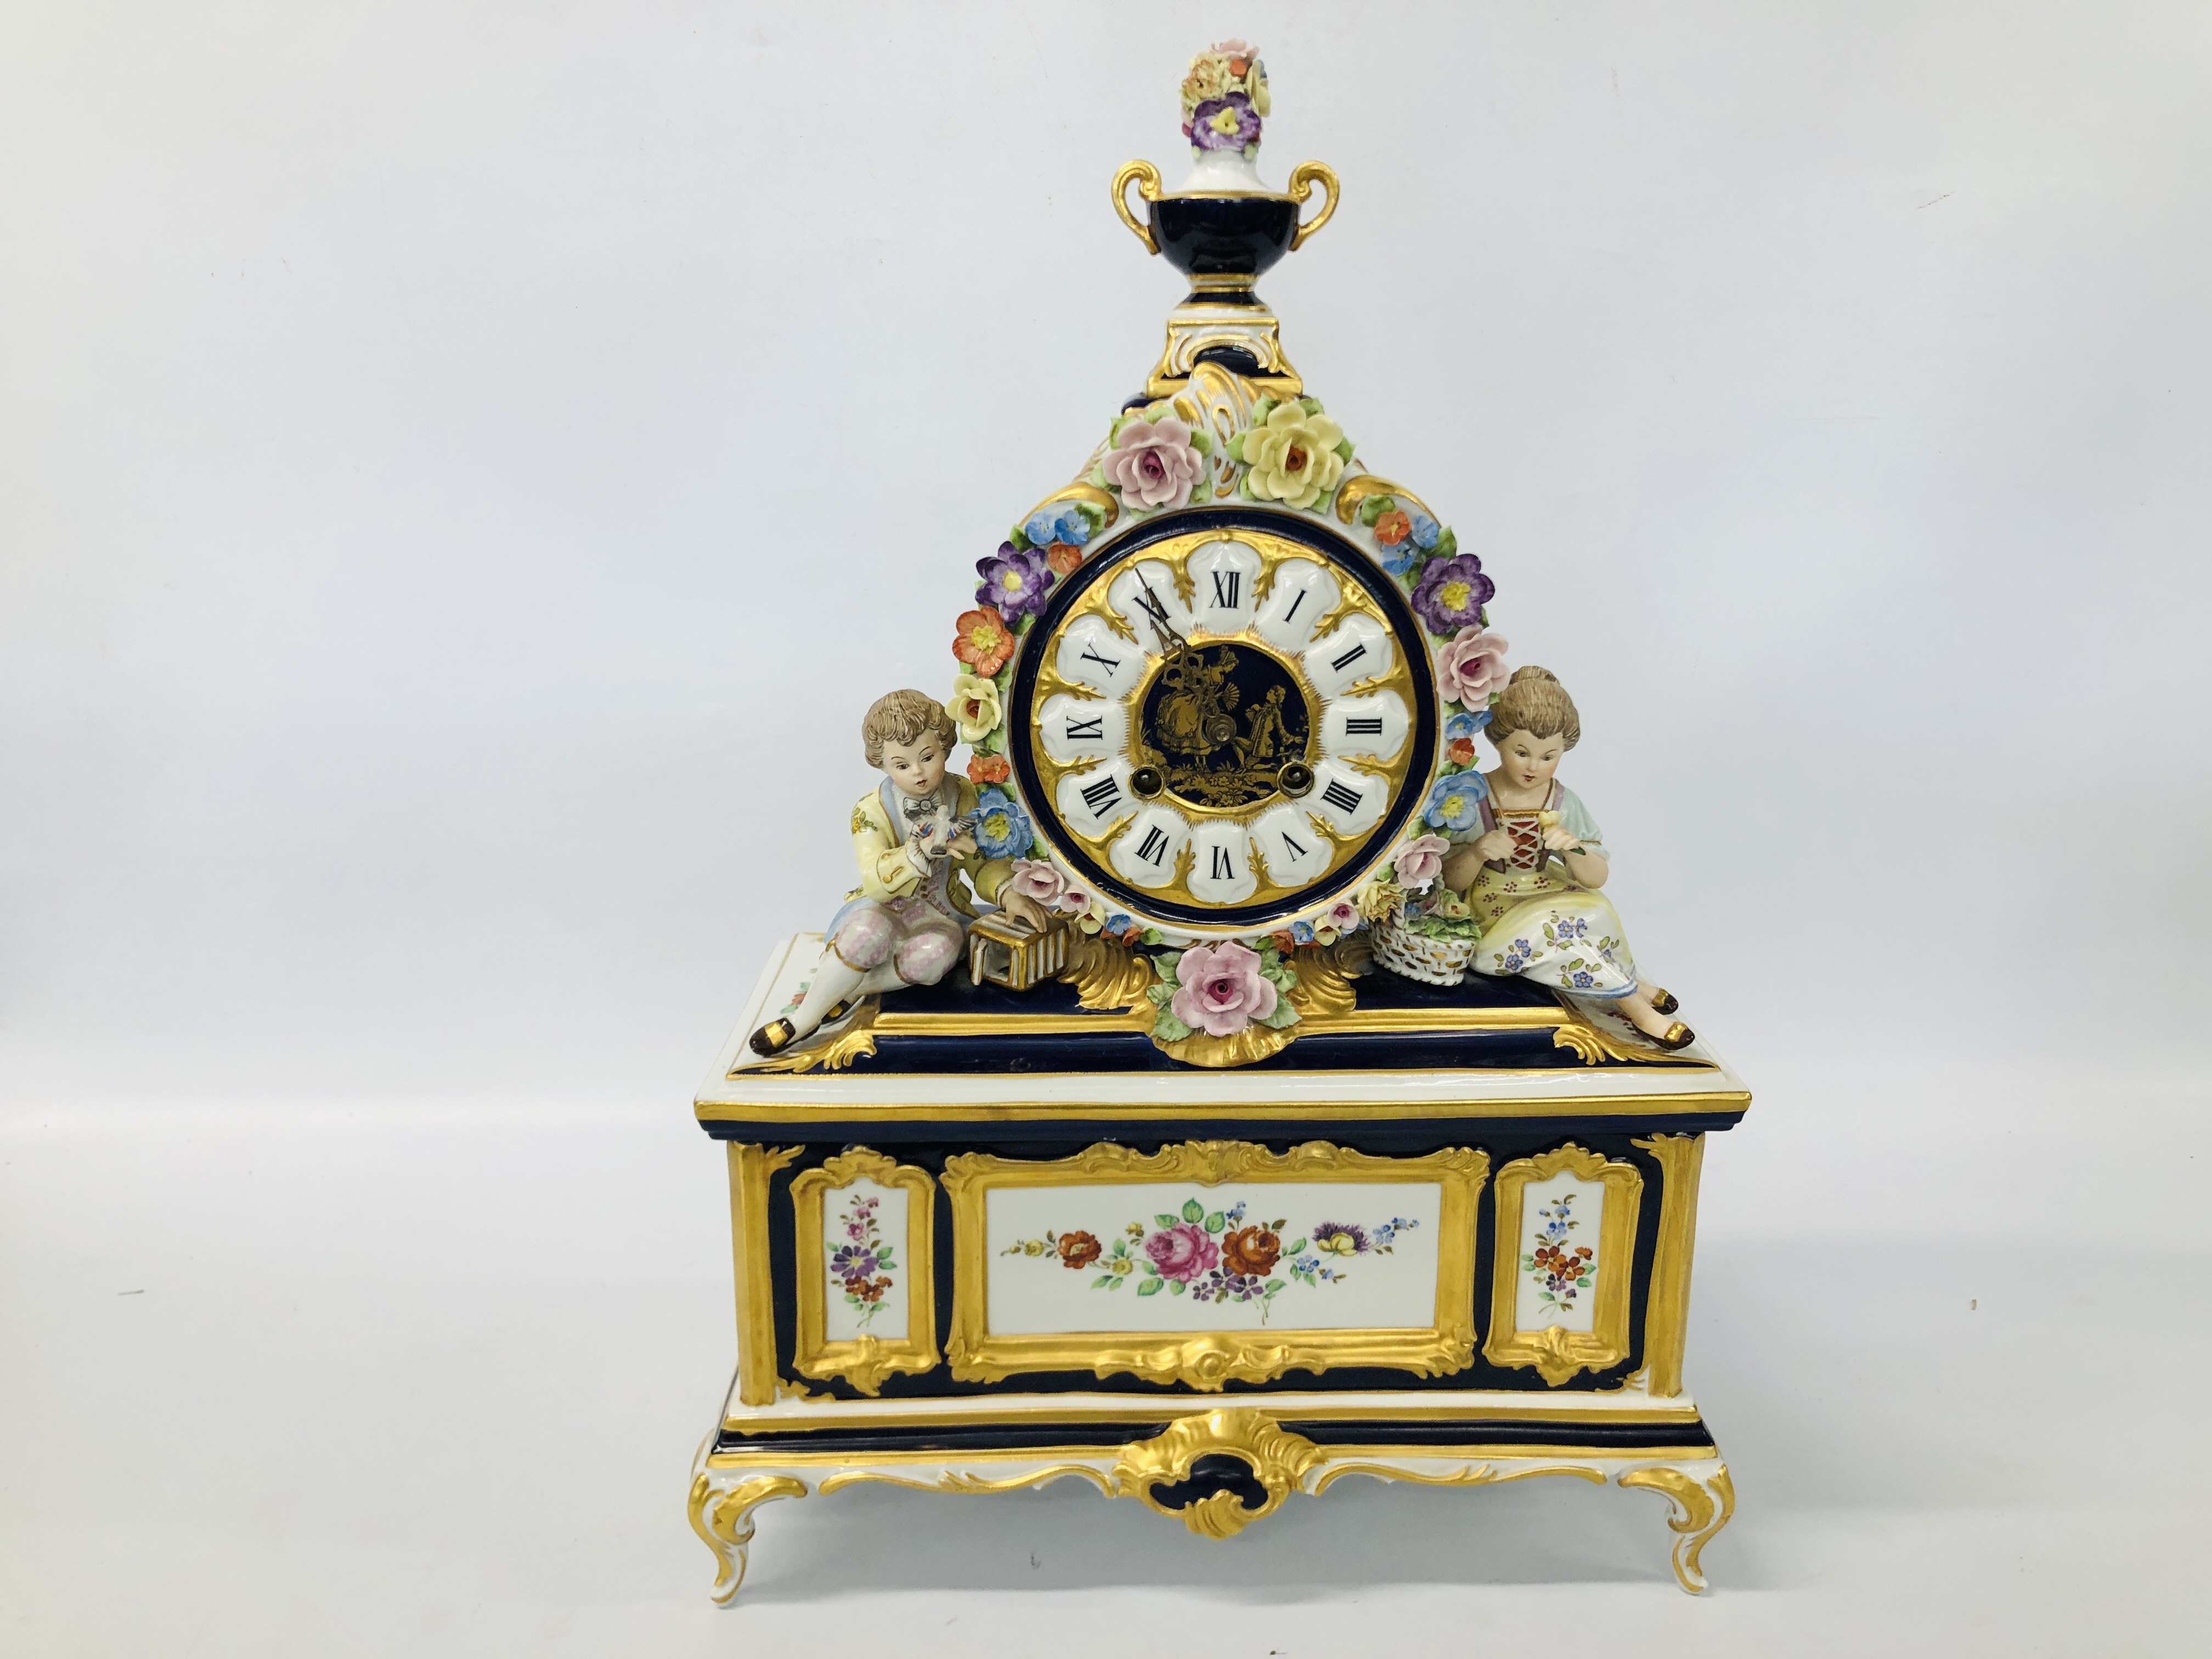 HIGHLY DECORATIVE MODERN PORCELAIN DRESDEN CLOCK ADORNED WITH BRIGHTLY COLOURED FLOWERS AND GILT